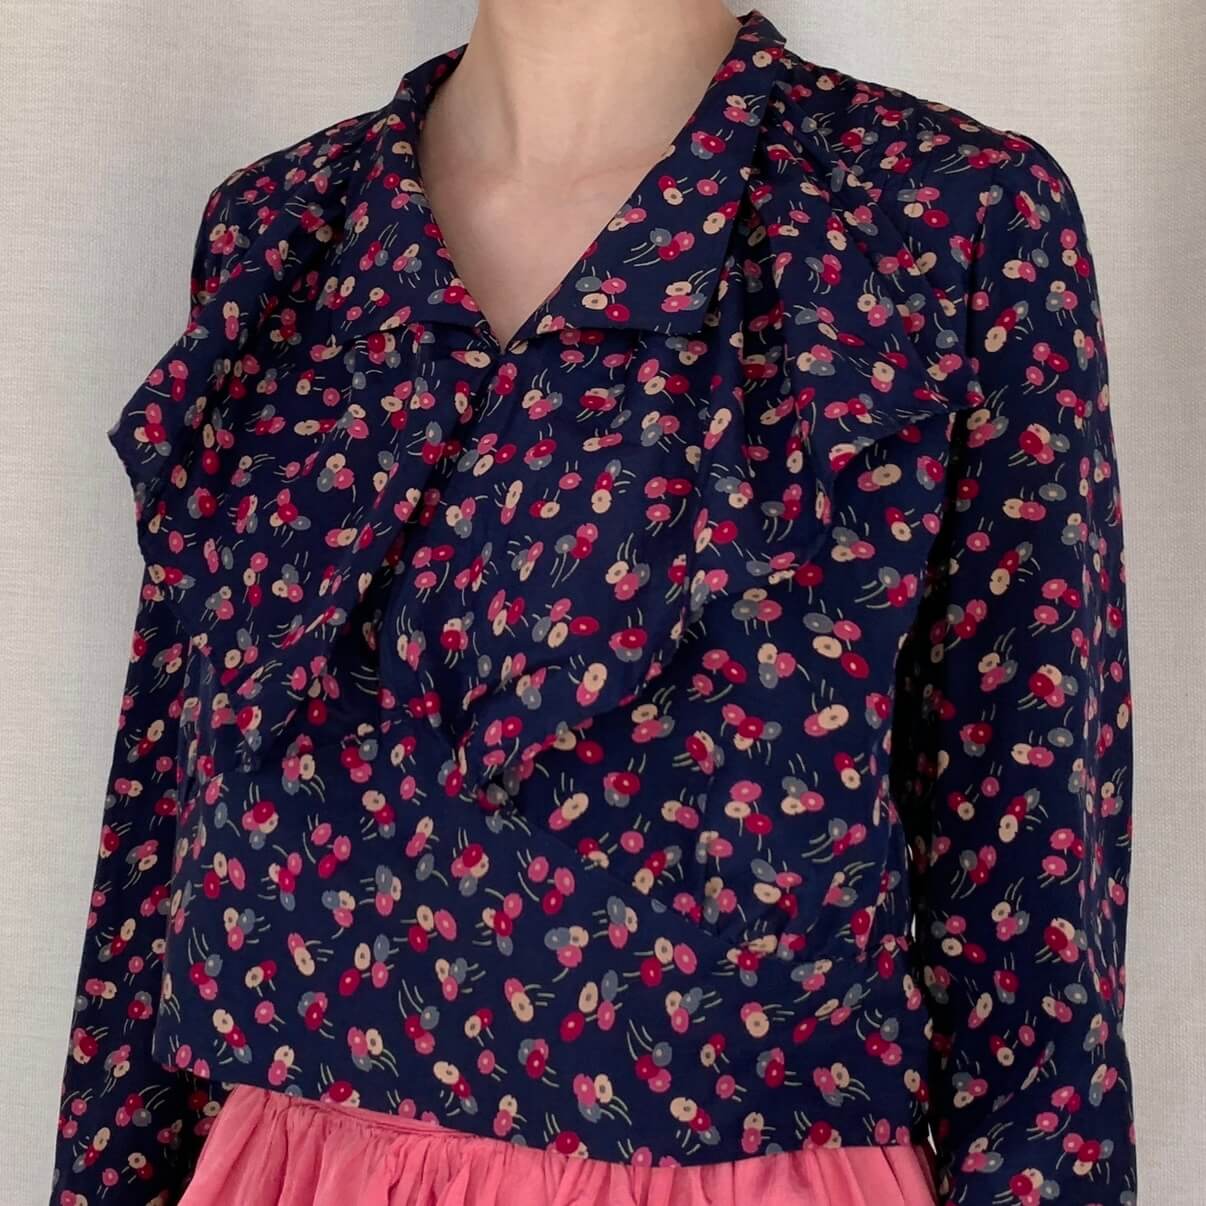 model wearing the navy top with ruffle collar and pink lollipop flowers